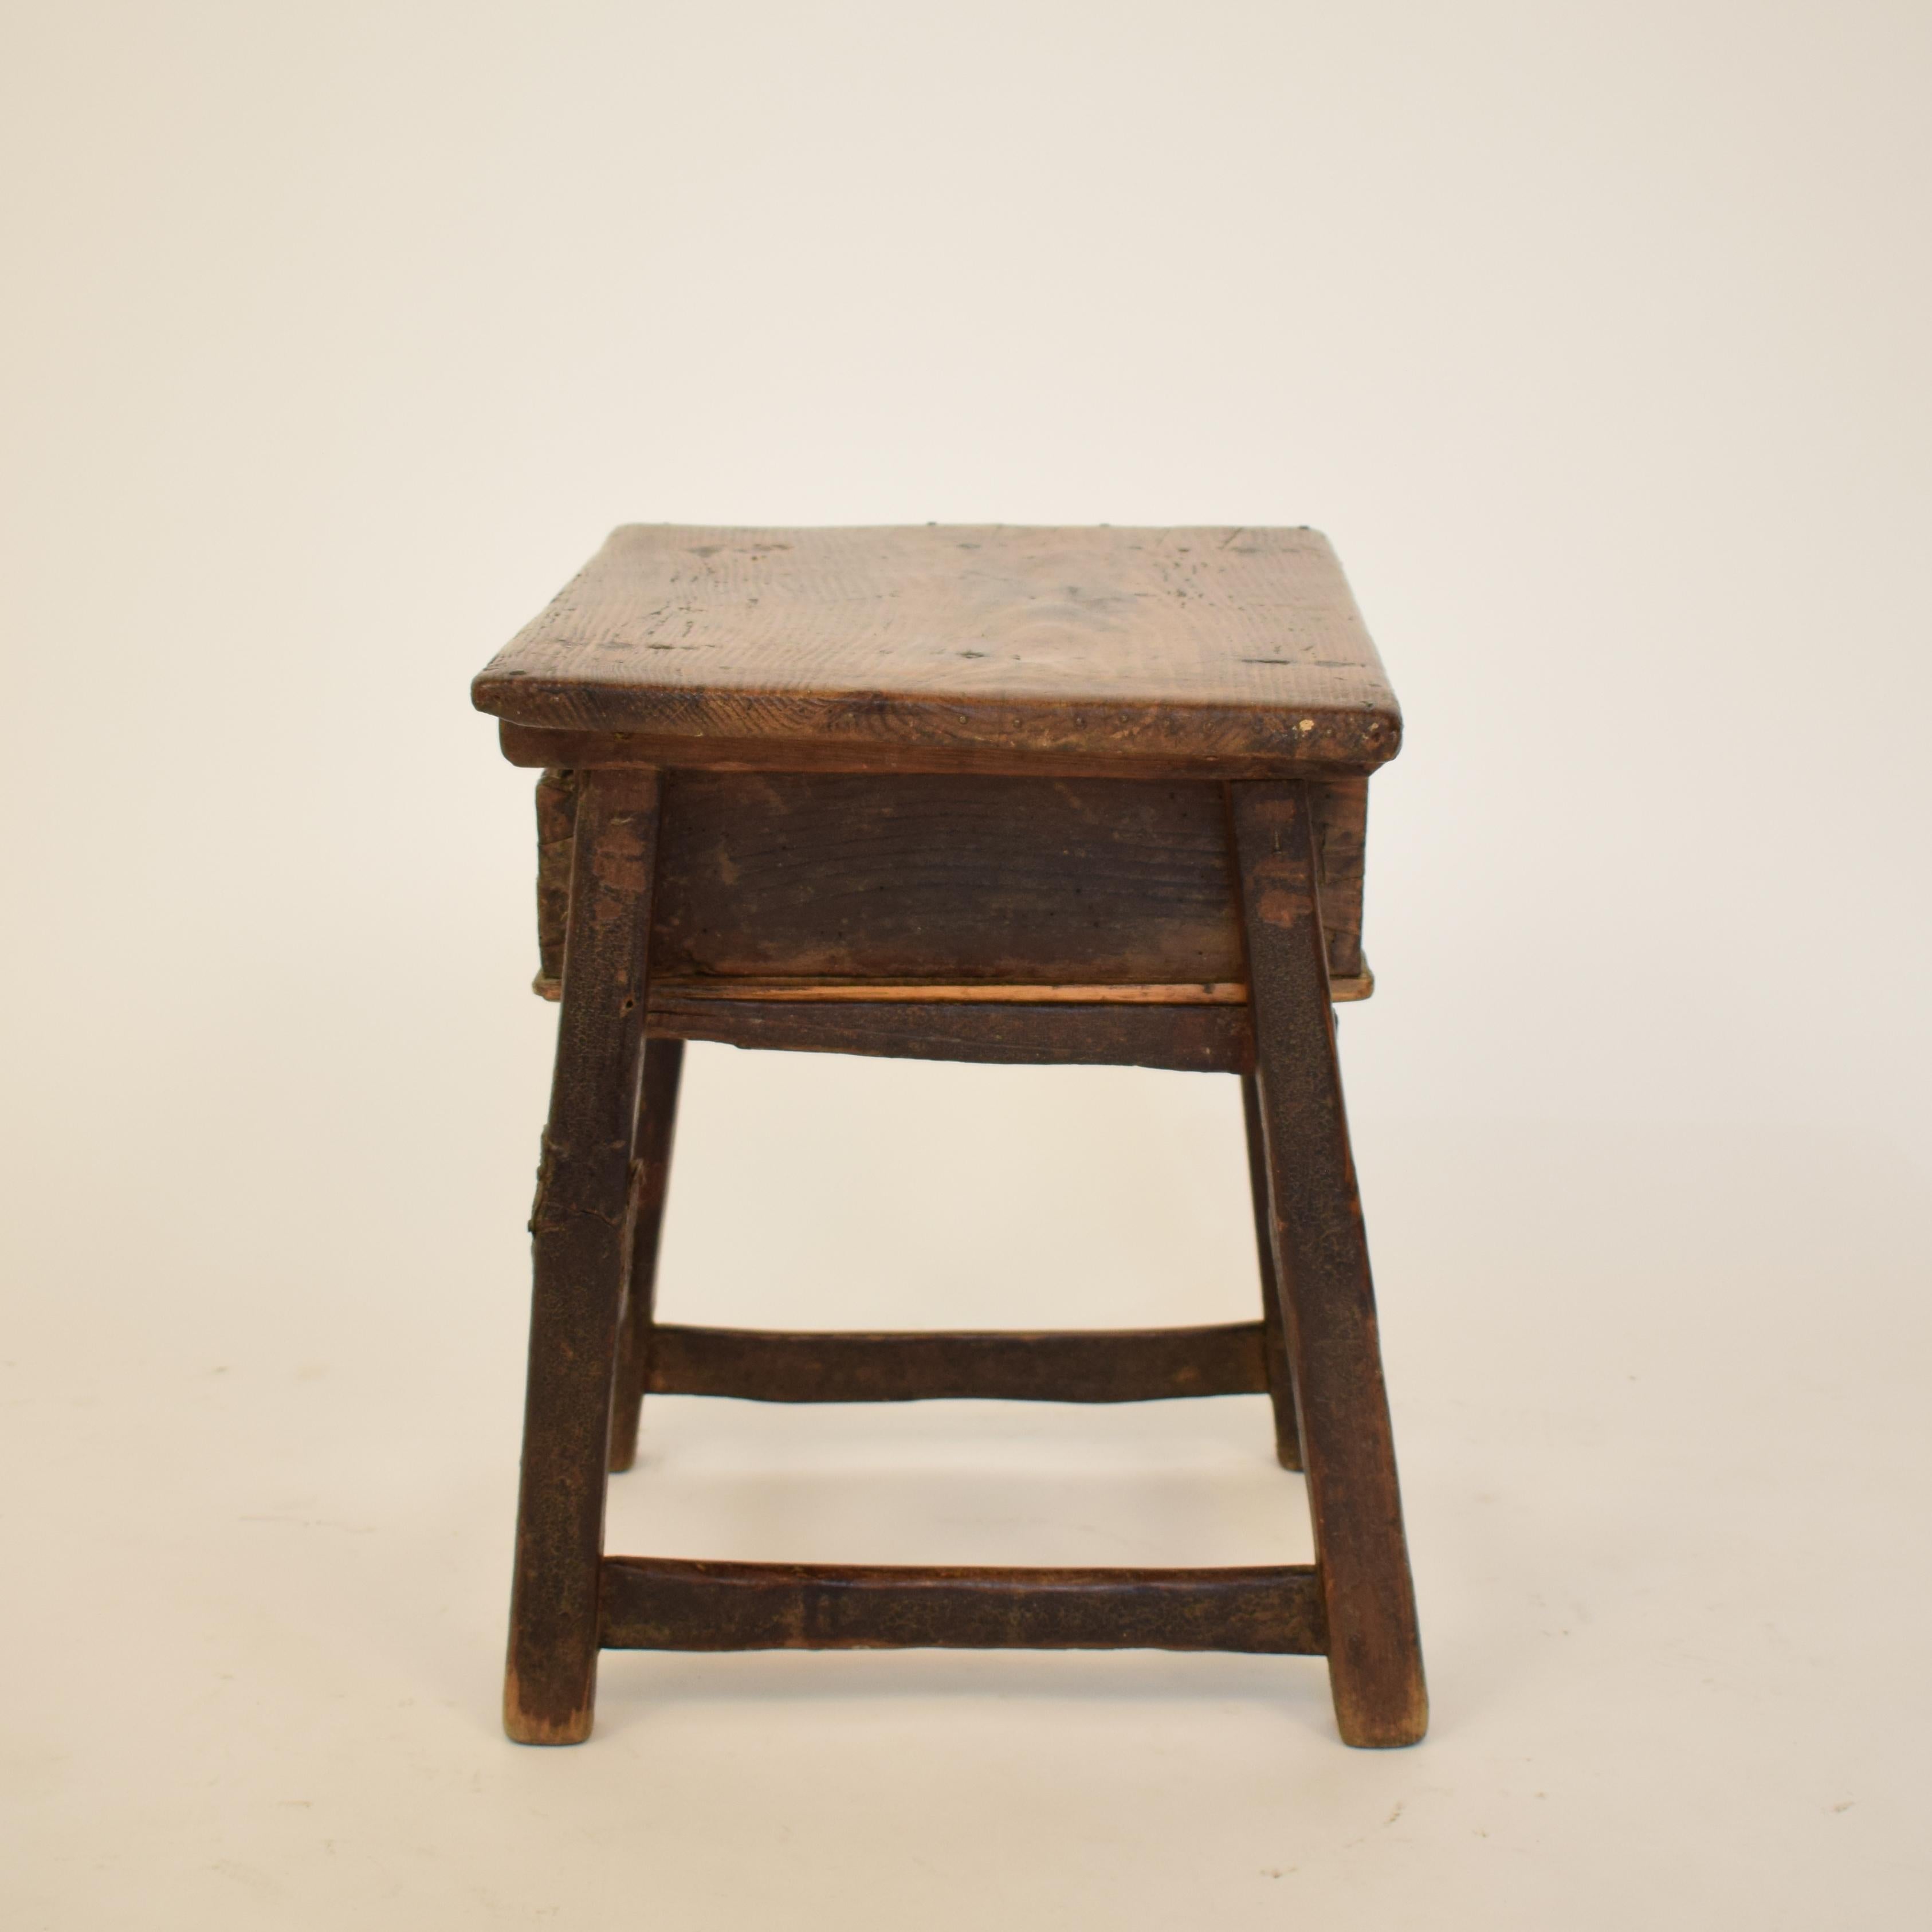 Late 17th Century Primitive Baroque Wabi-Sabi Small Pine Side Table with Drawer 2